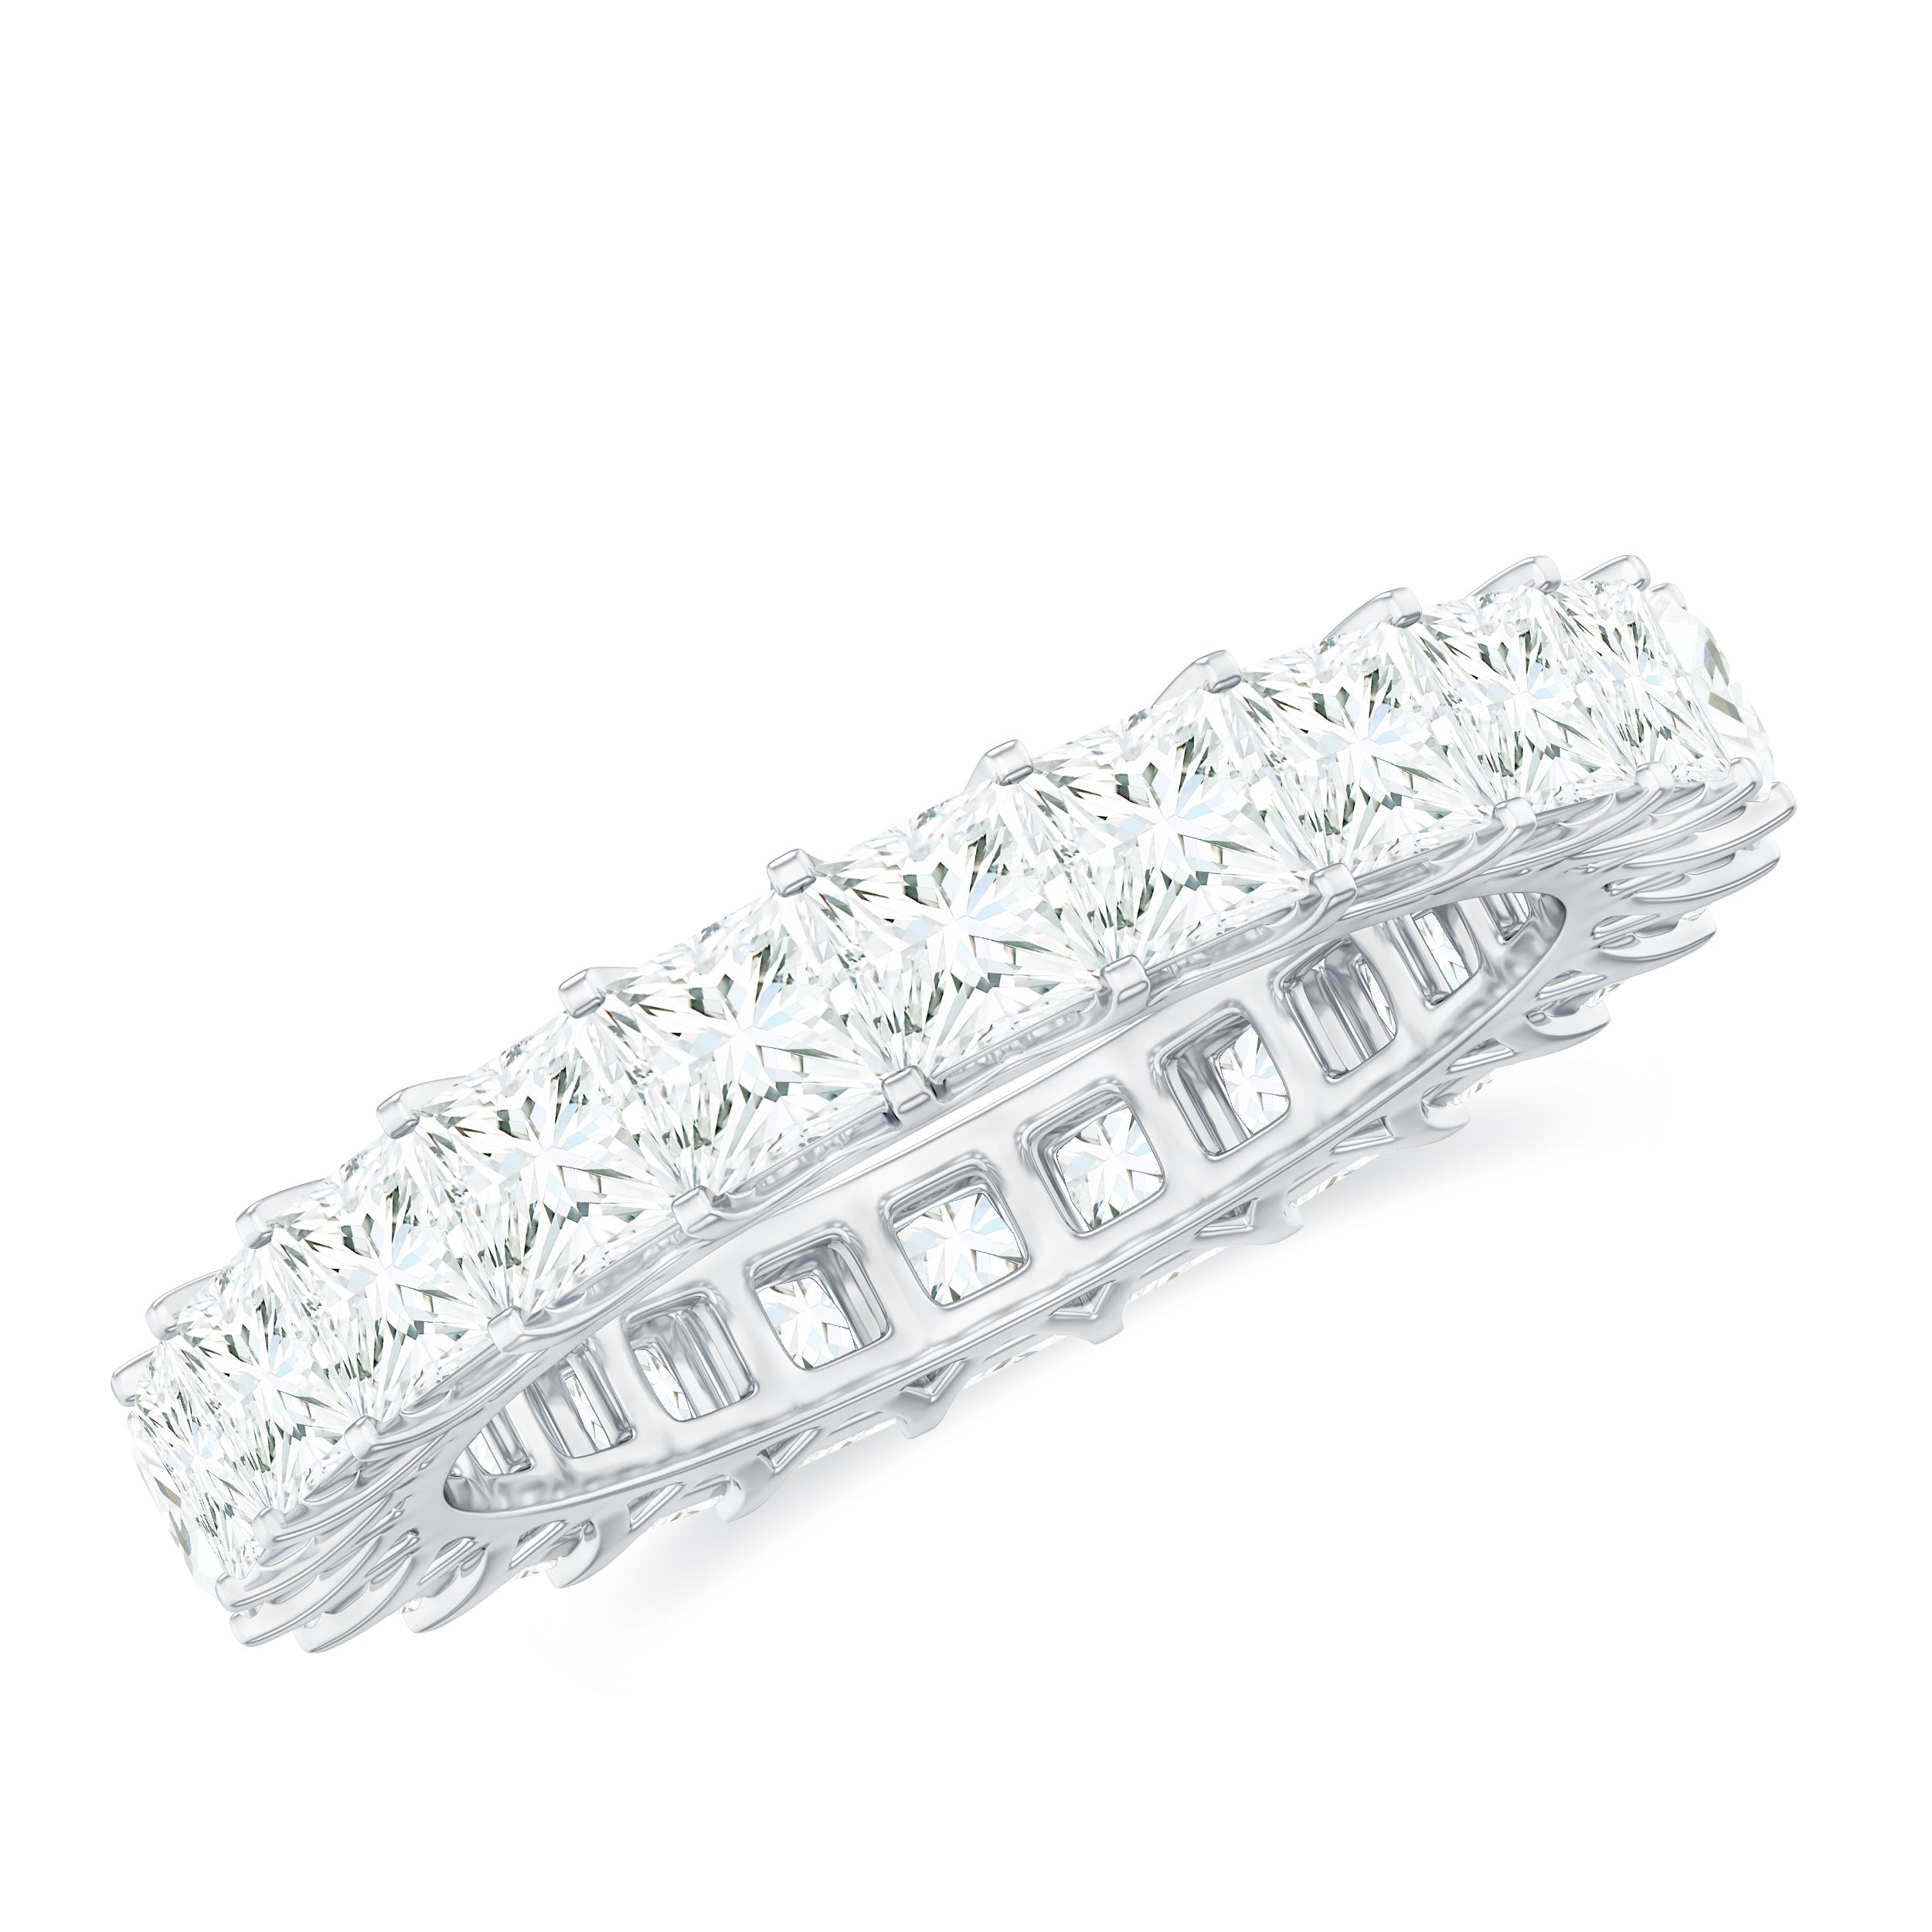 Princess Cut Moissanite Full Eternity Band Ring Moissanite - ( D-VS1 ) - Color and Clarity 92.5 Sterling Silver 5.5 - Rosec Jewels